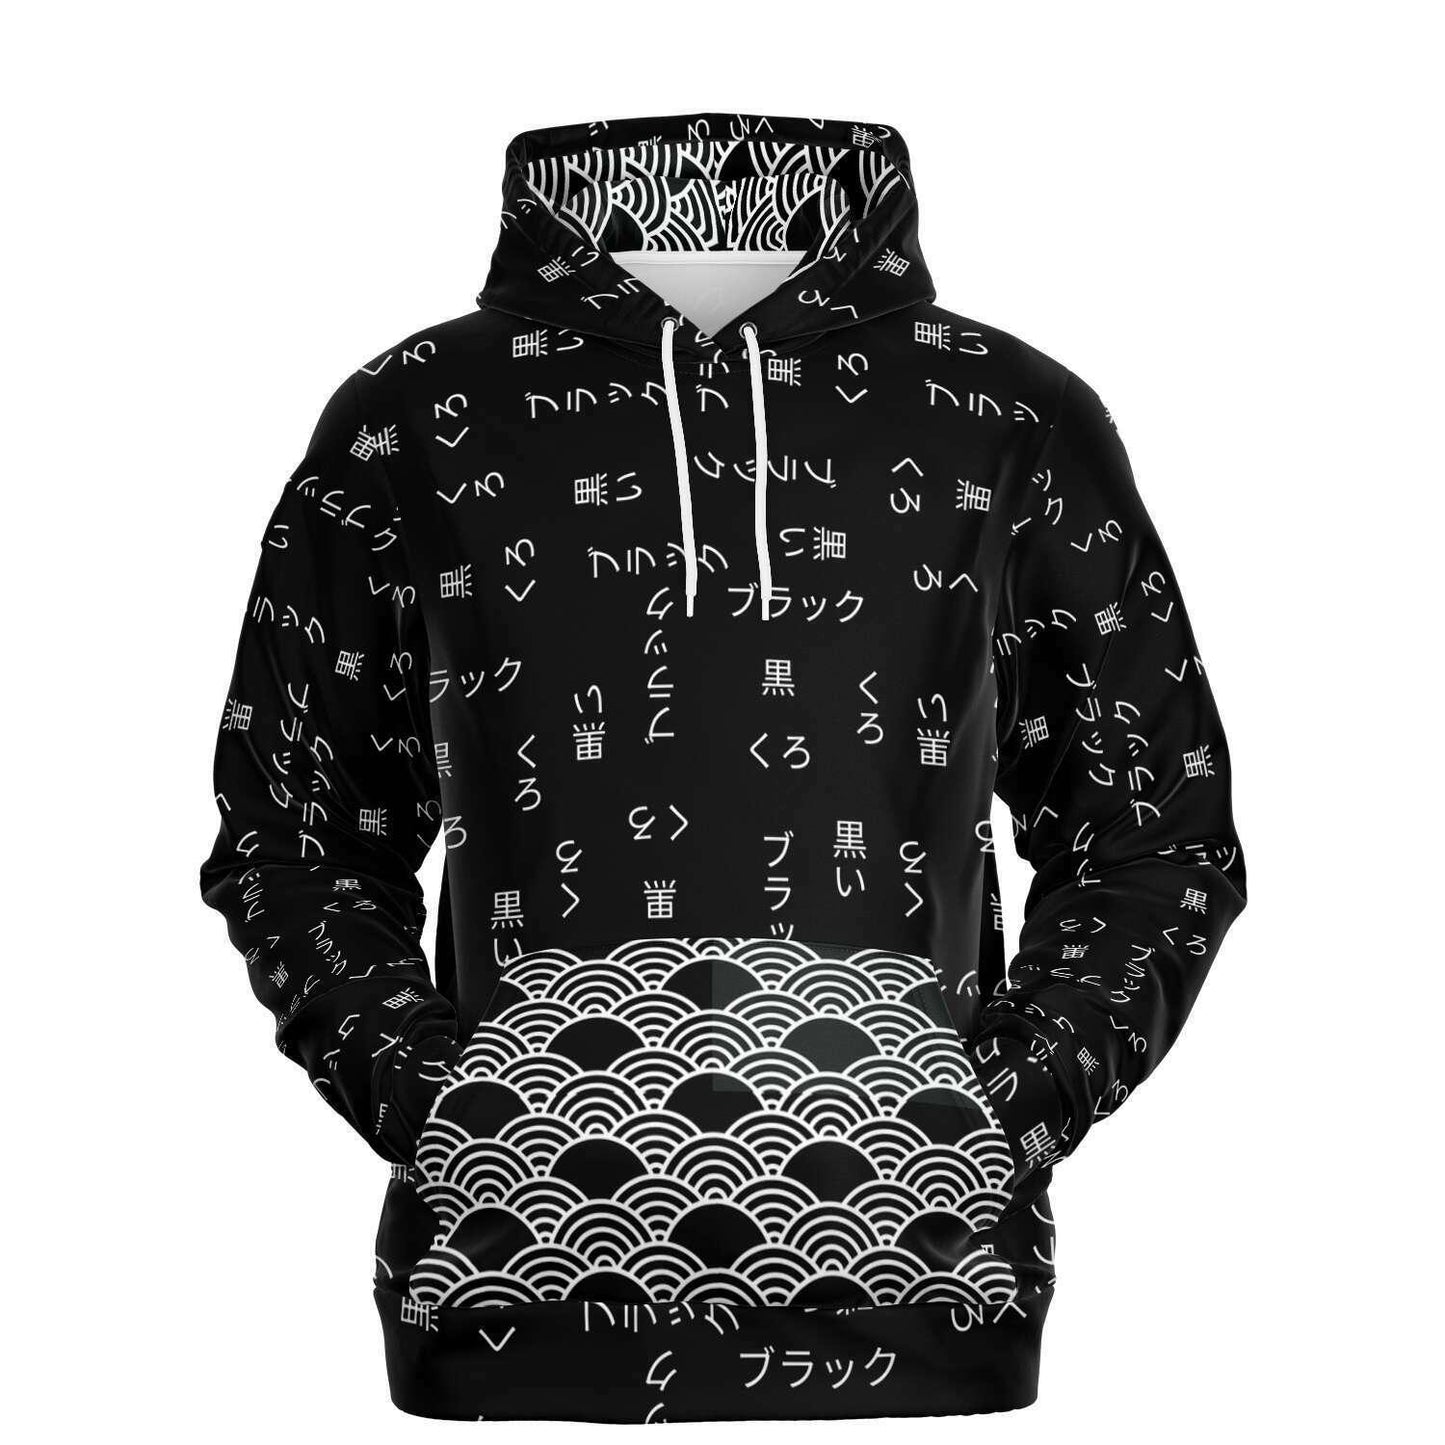 Black Hoodie with written the word "Black" in white characters. The words are written in both Kanji, Hiragana, Katakana and romanji. The front pocket and the inside of the hood has the same wave pattern in black and white